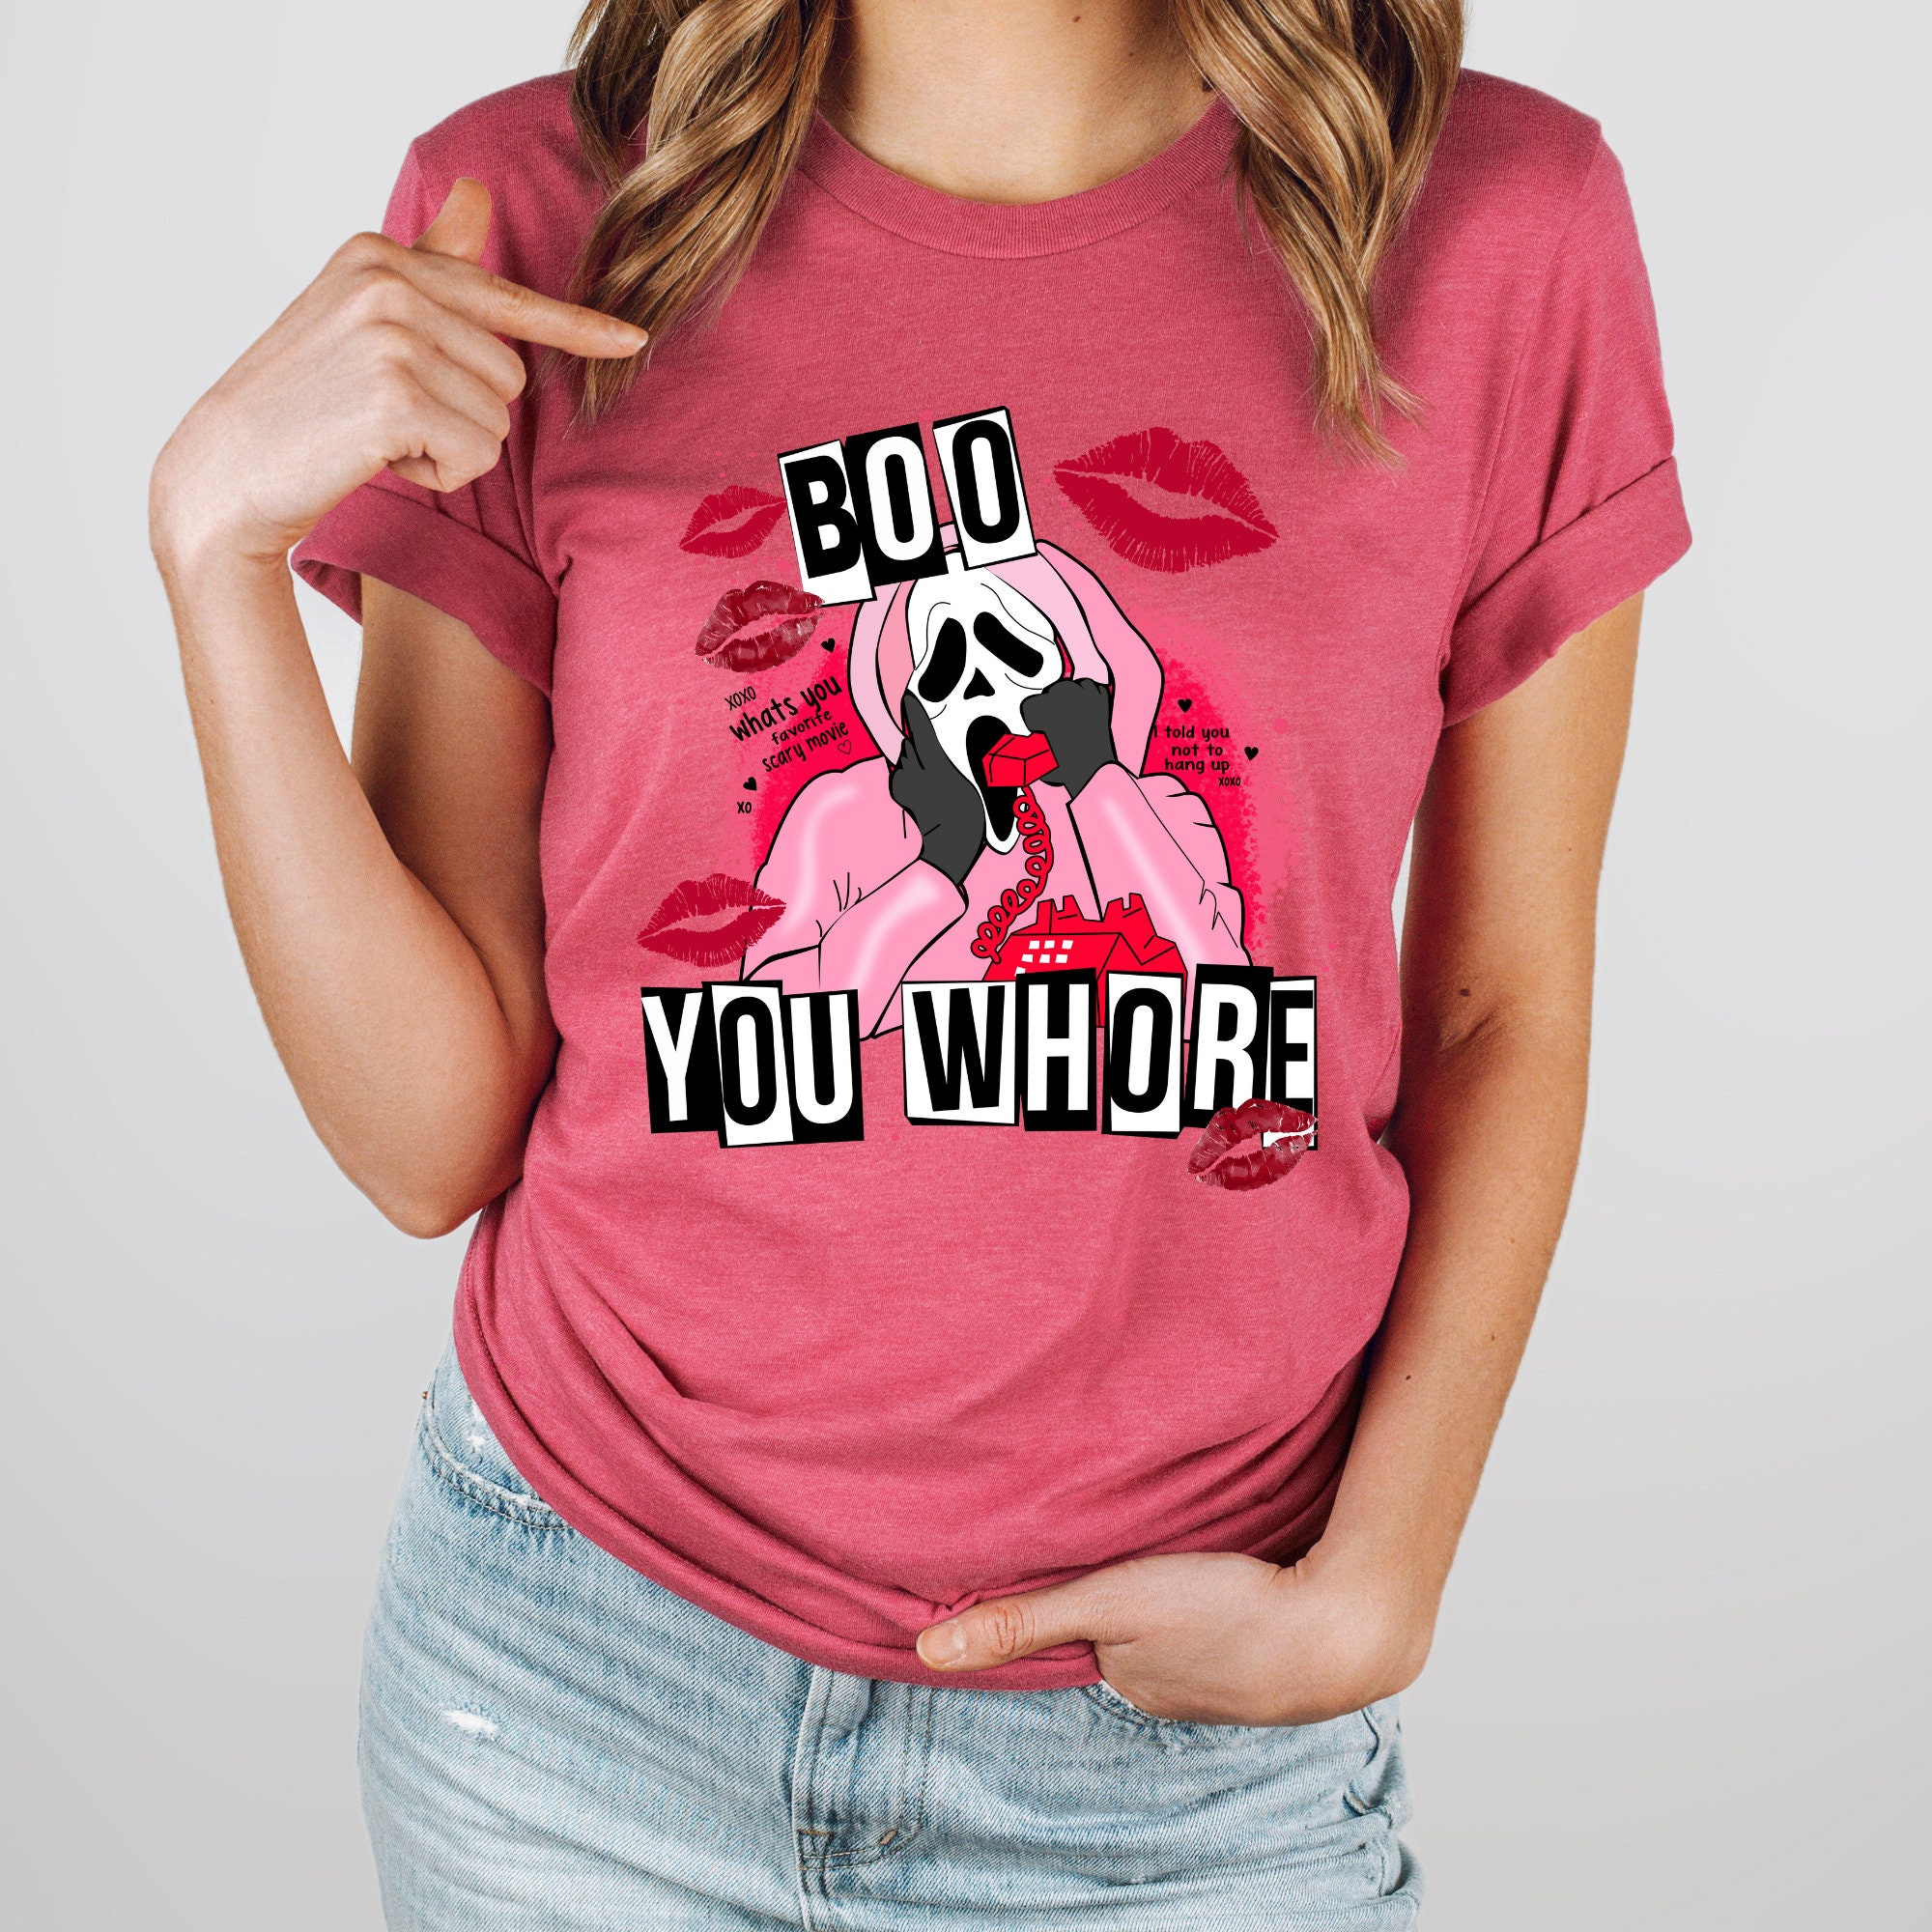 Discover Mean Girls "Boo You Whore" Sweatshirt: Valentine's Horror Movie Design with Spooky Bleached Look